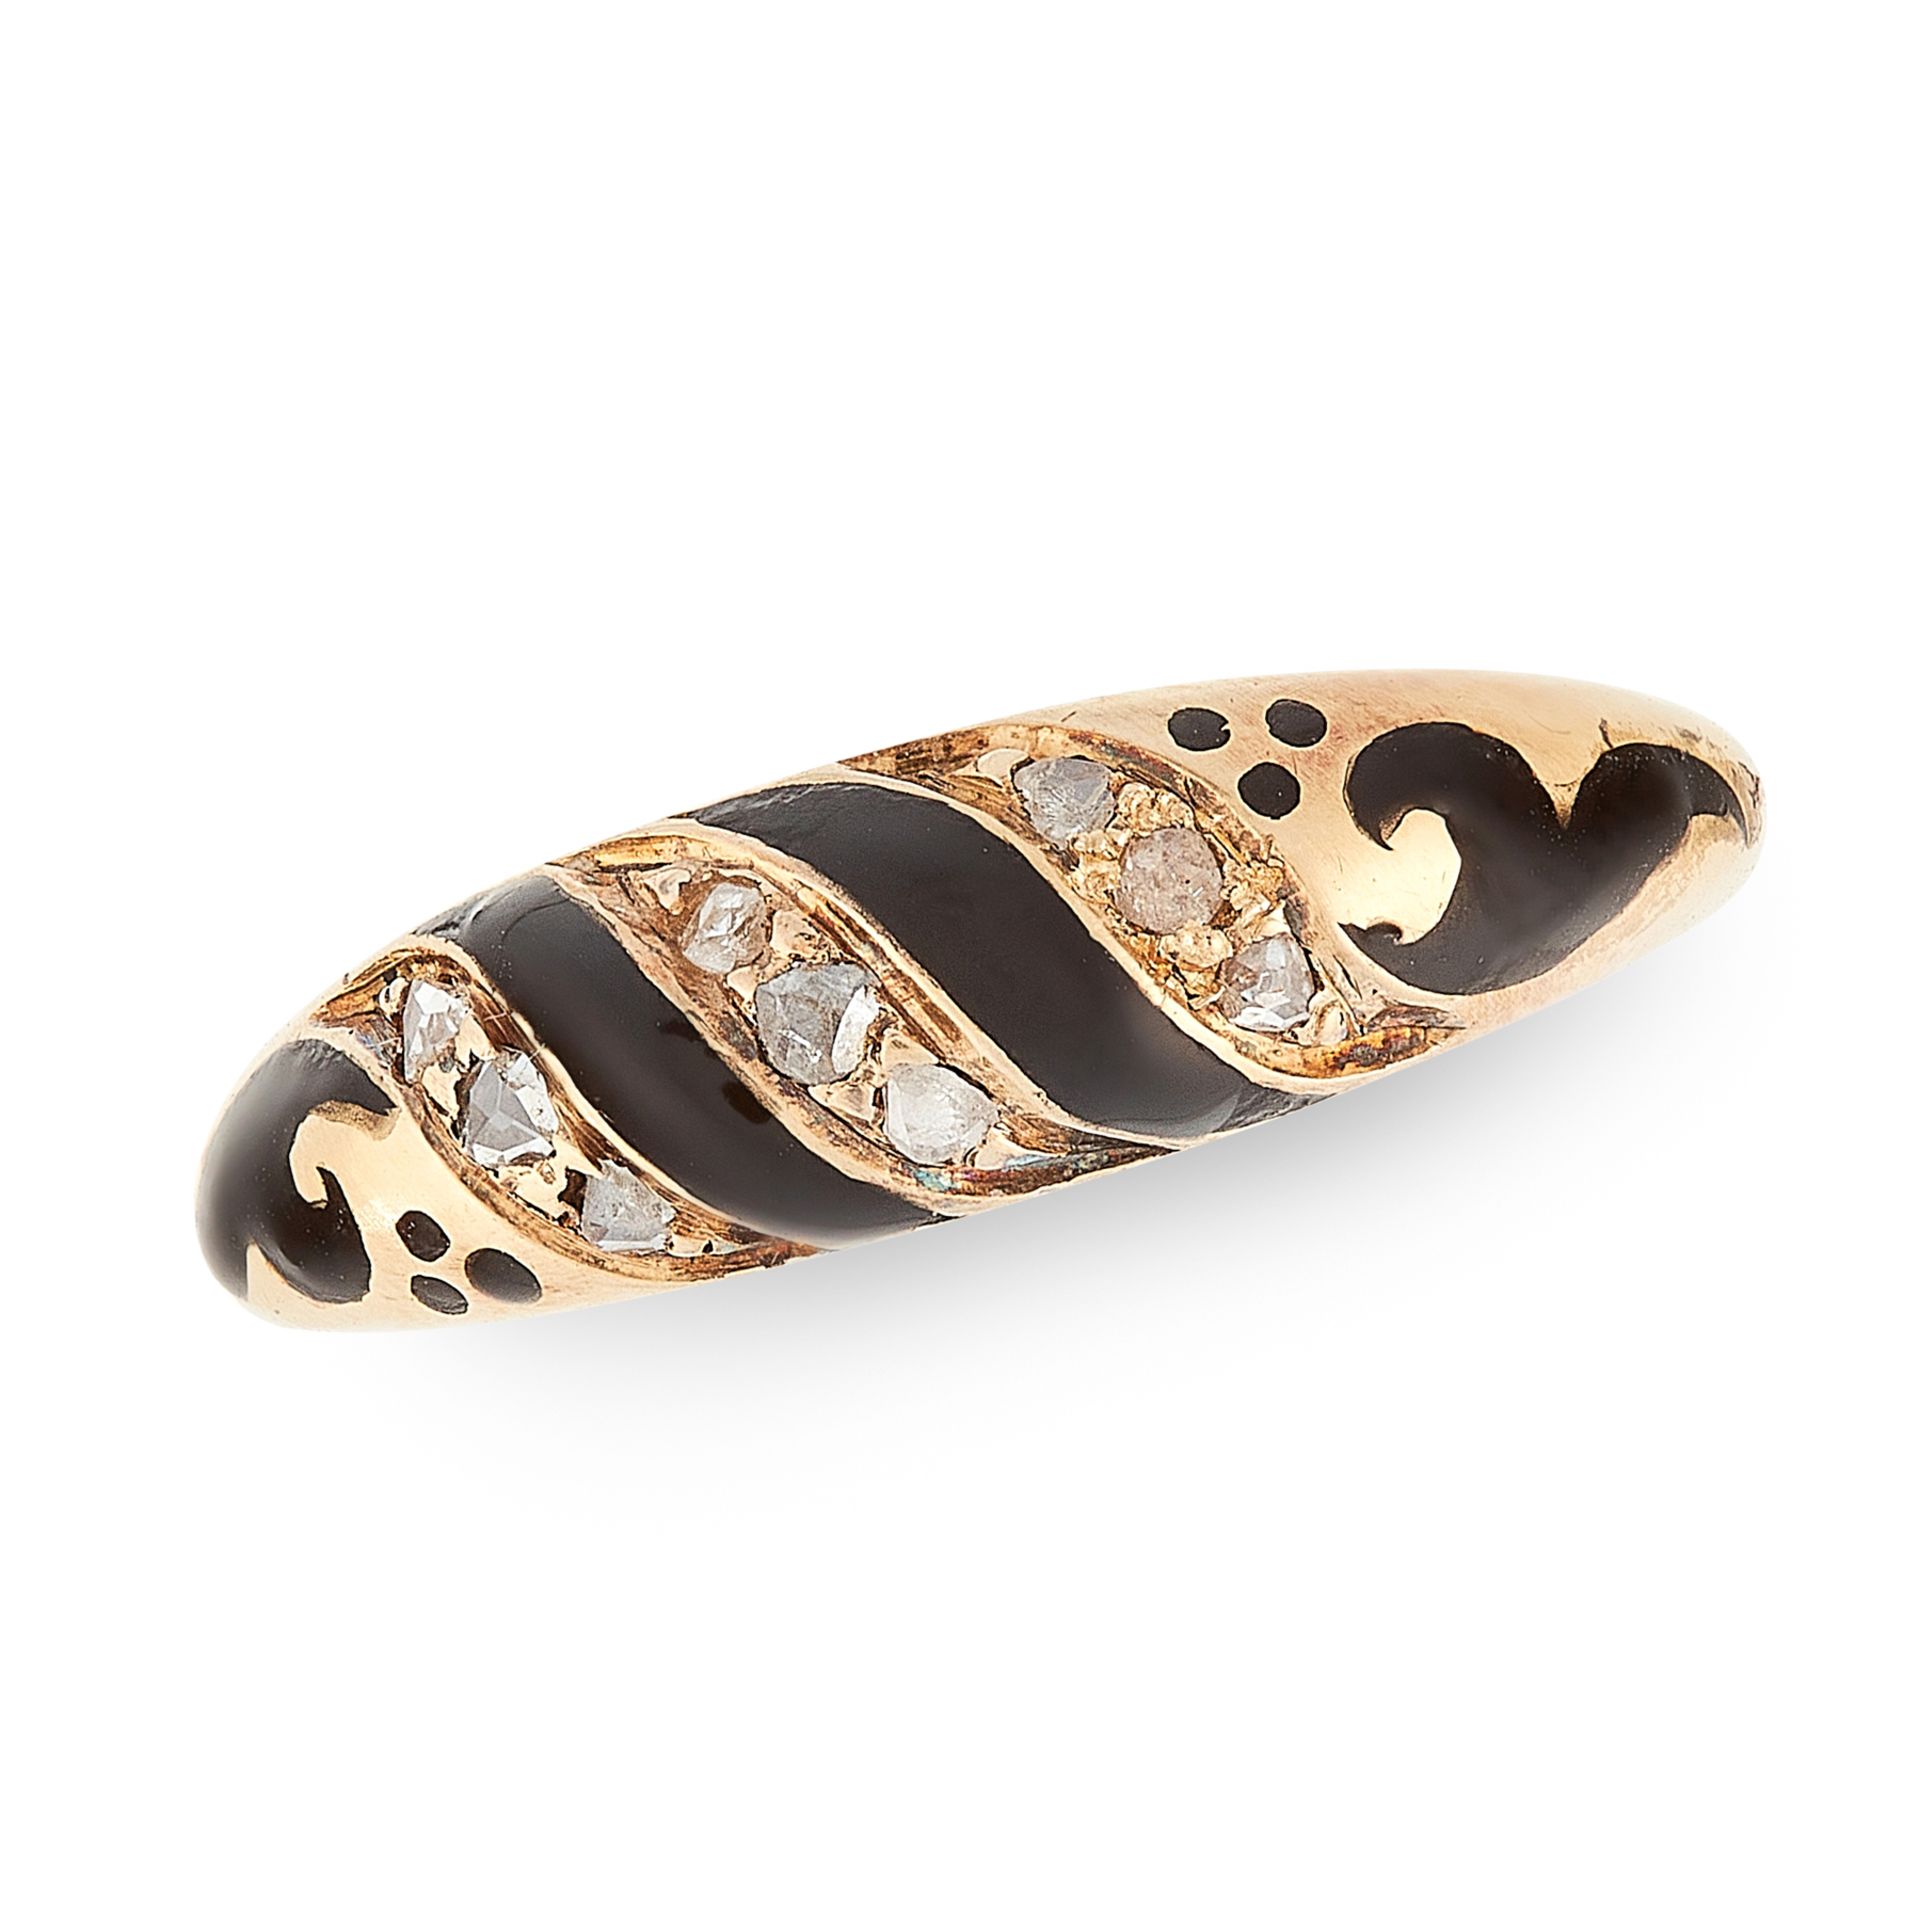 AN ANTIQUE DIAMOND AND ENAMEL RING in high carat yellow gold, the band is decorated with alternating